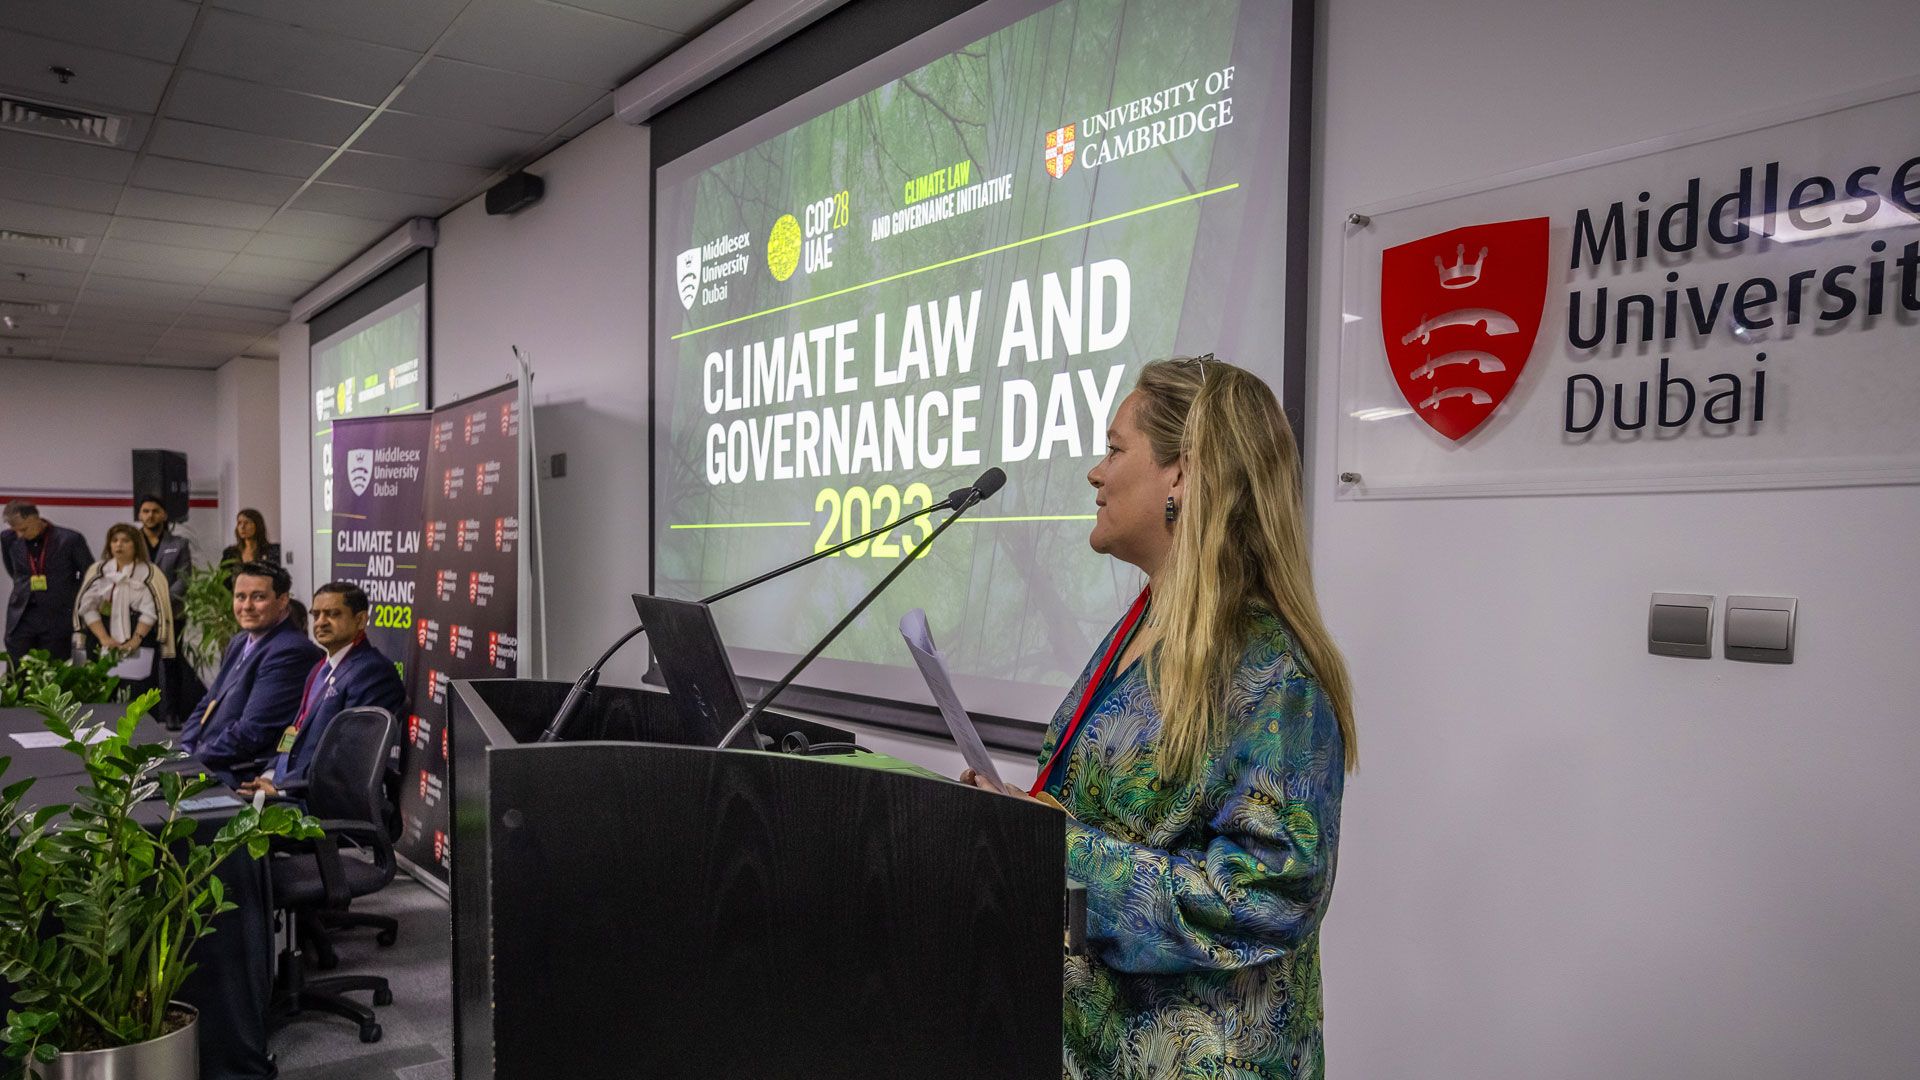 Annual GLGI Climate Law and Governance Day